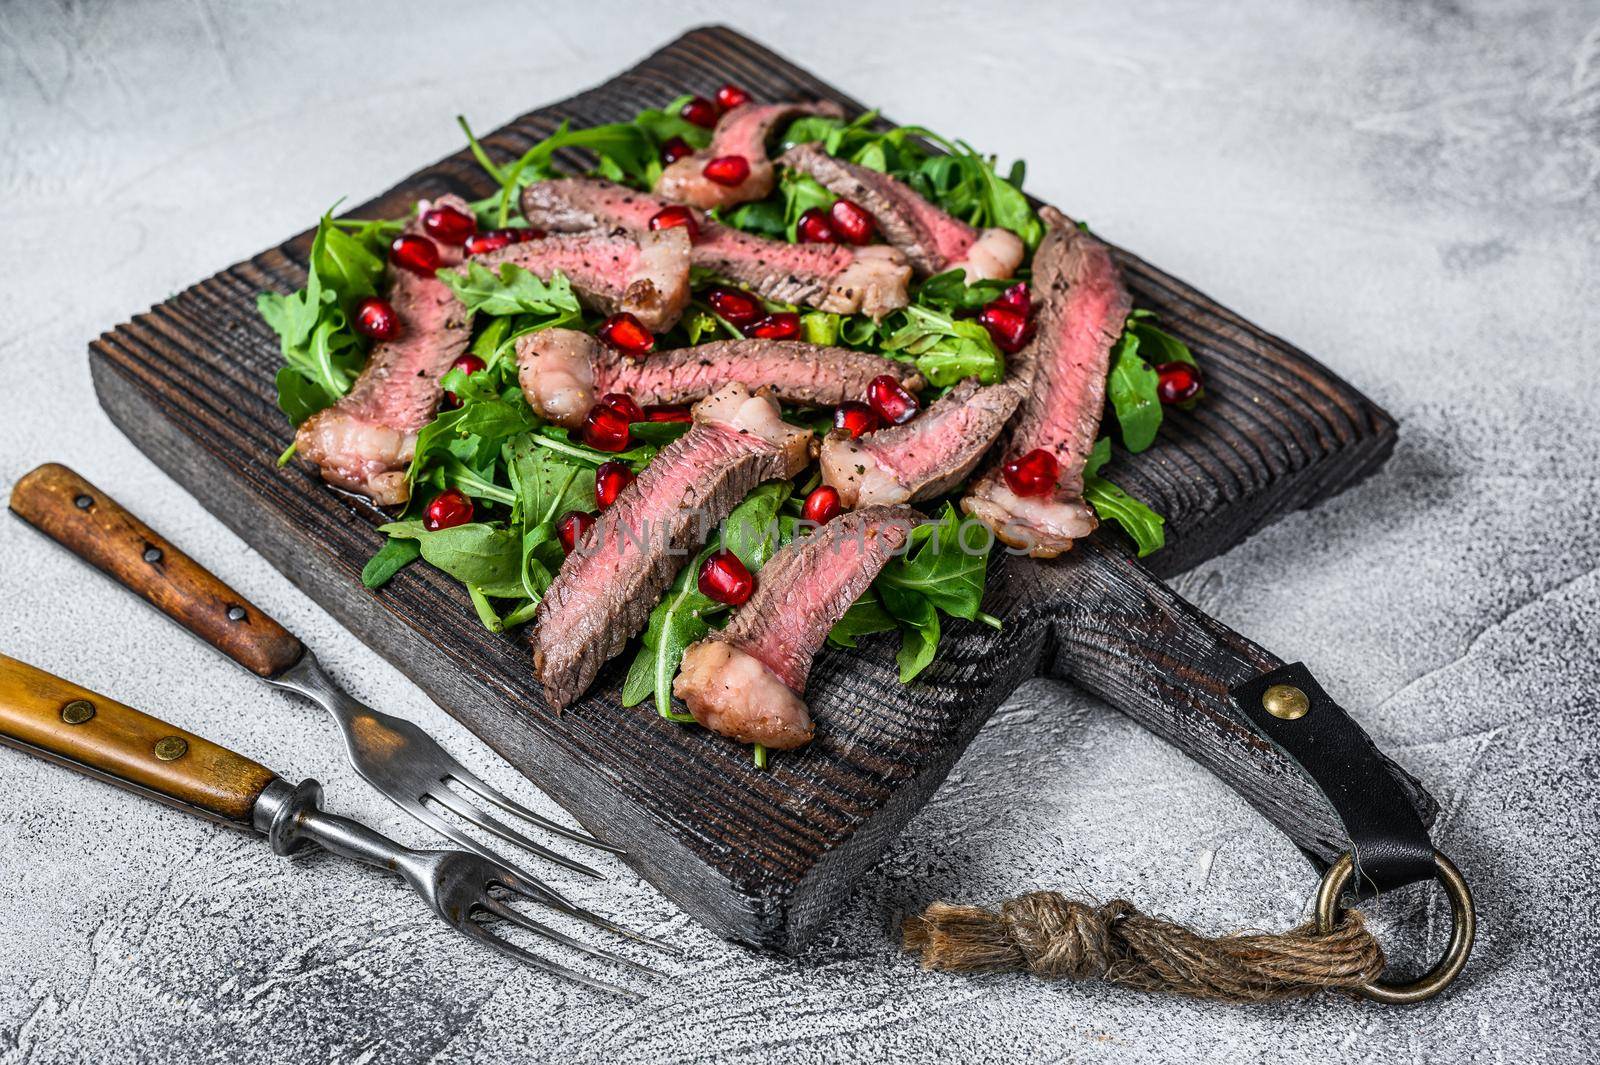 Sliced grilled beef steak with arugula leaves salad on rustic cutting board. White background. Top view by Composter